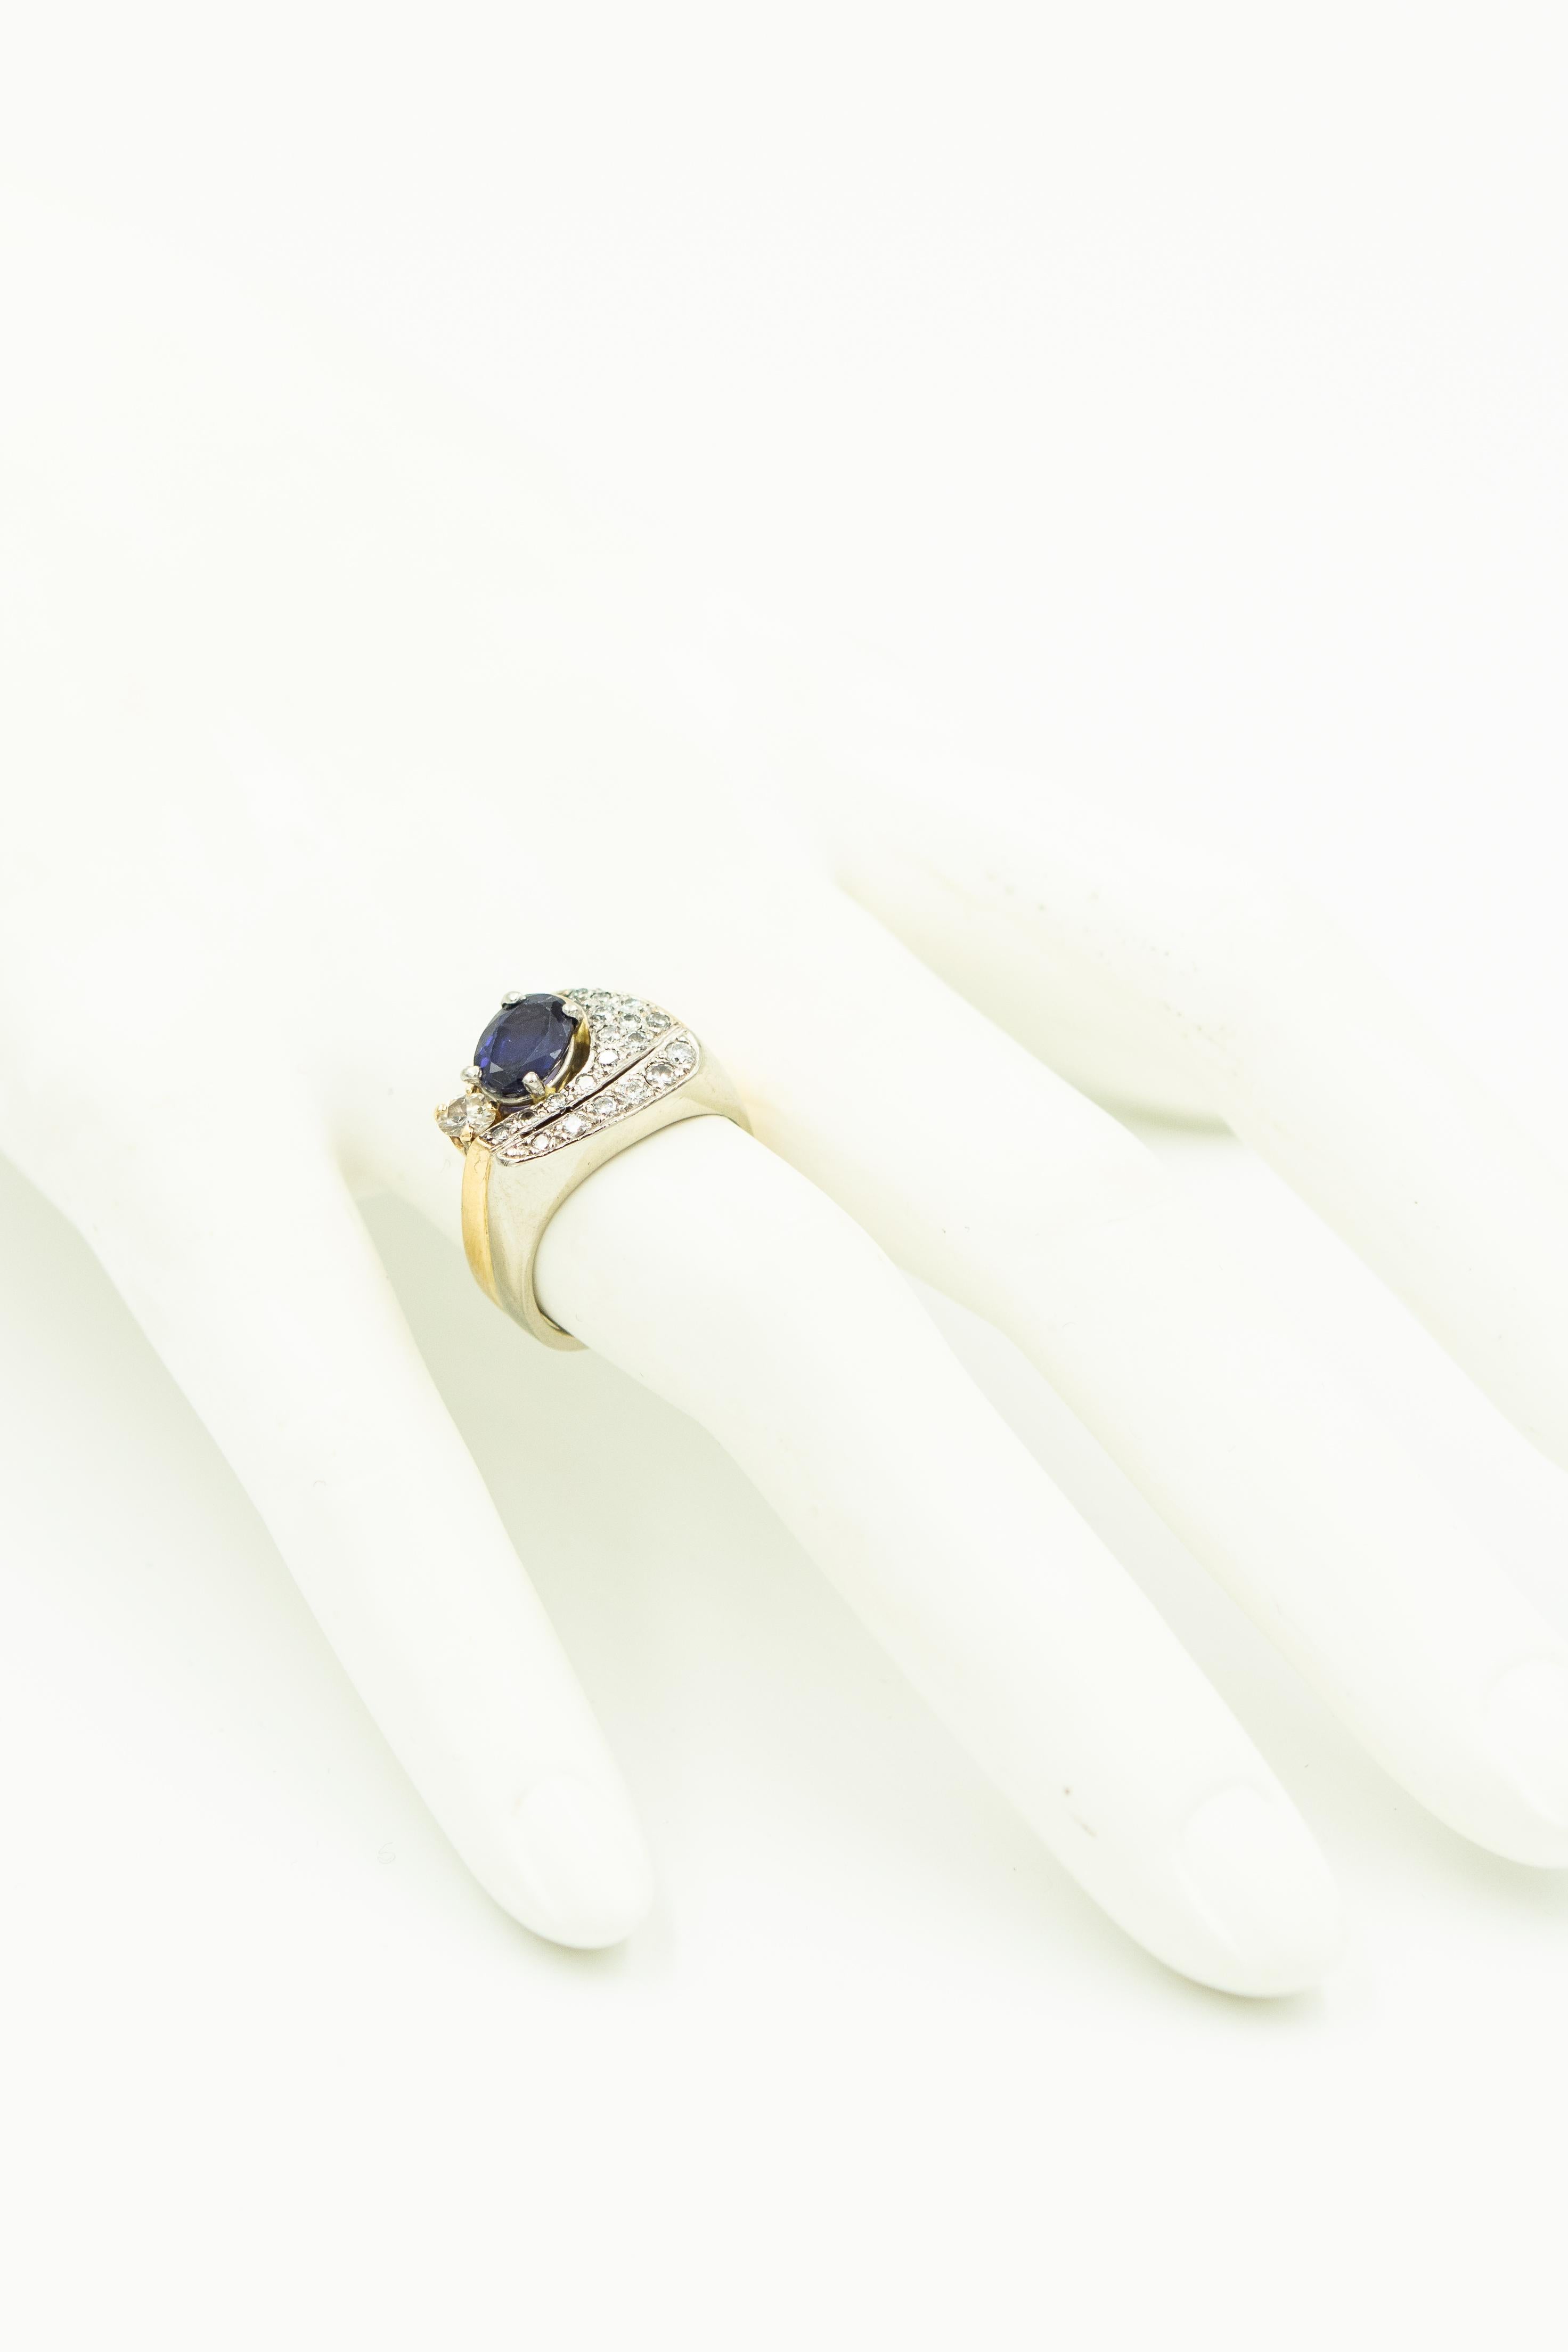 Modernist Tanzanite Diamond Two Tone White and Yellow Gold Cocktail Ring For Sale 1